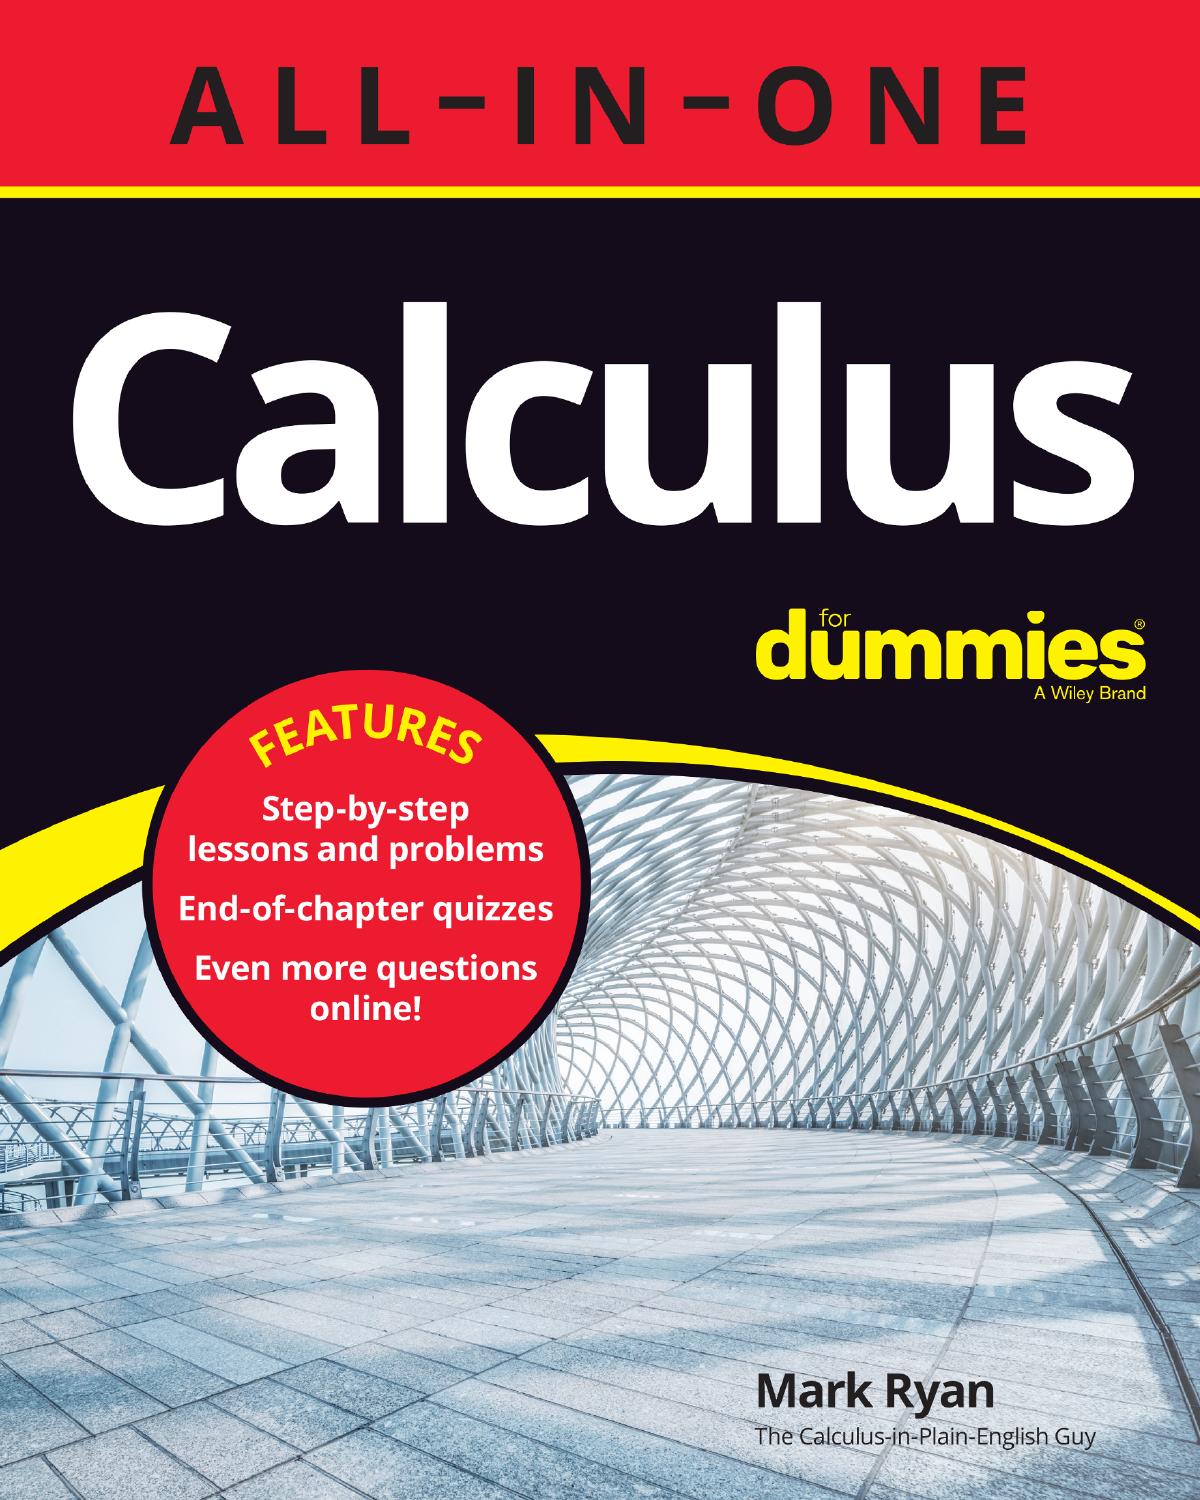 Calculus All-in-One For Dummies by Mark Ryan